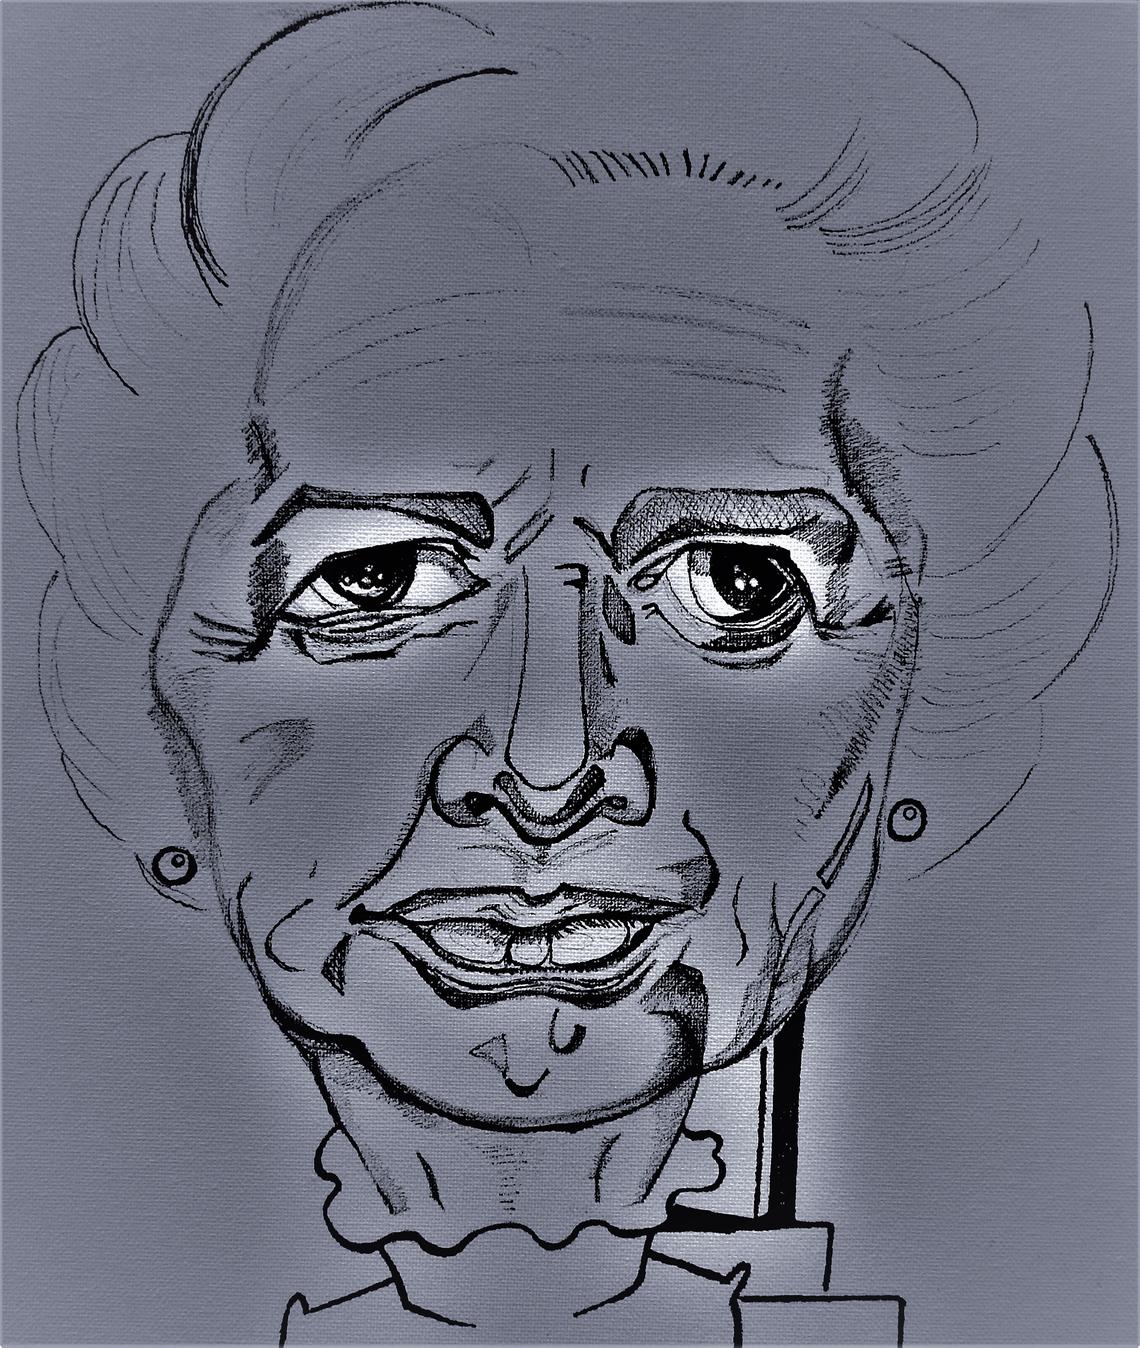 Caricature by PIGFISH - Margaret Thatcher The Iron Lady